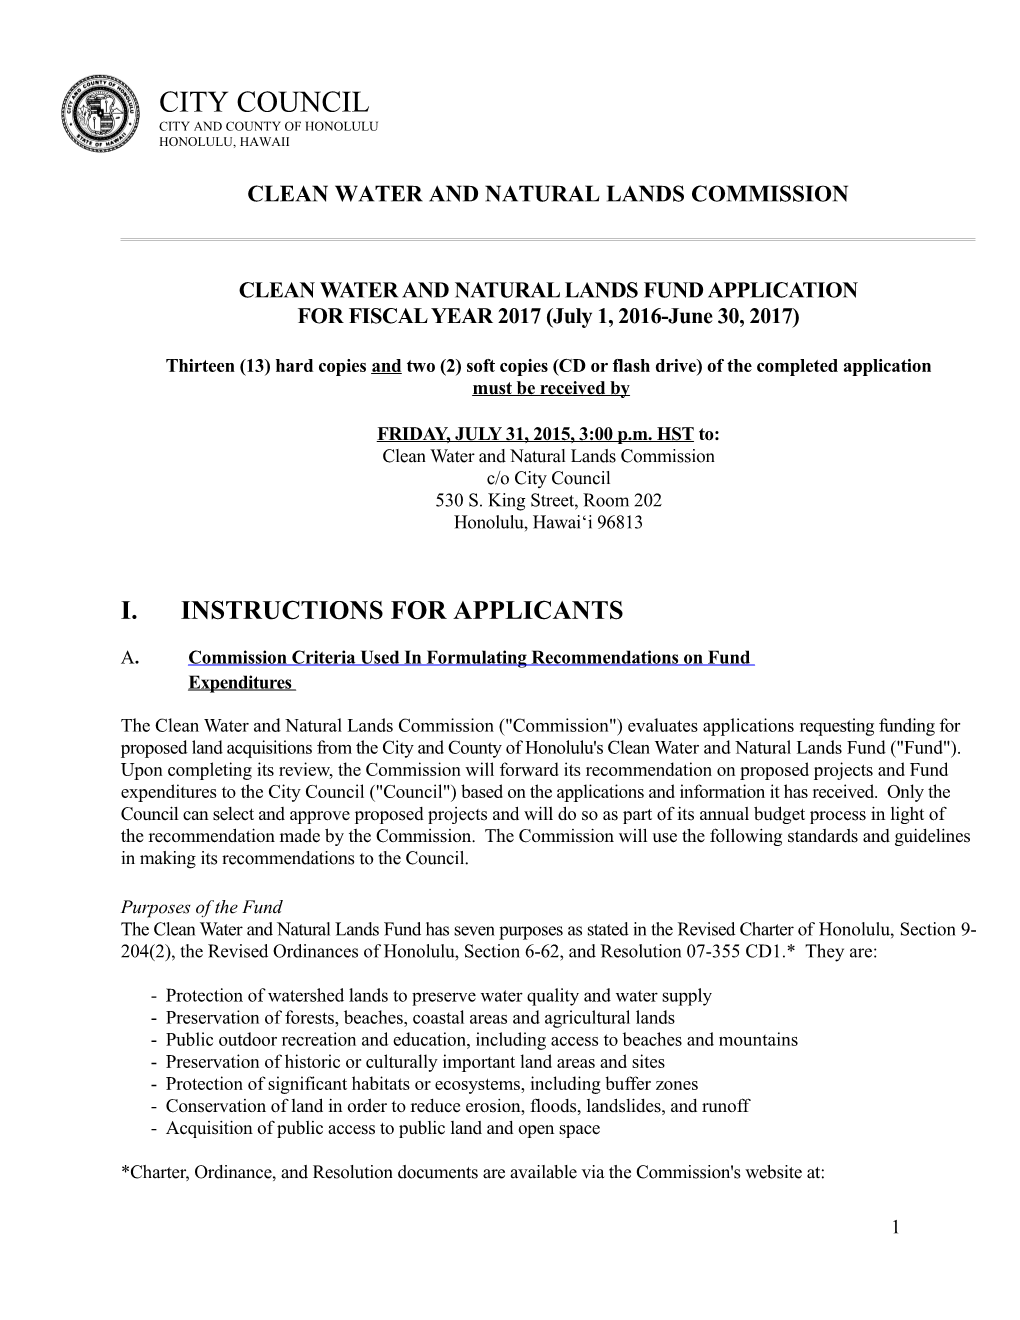 Clean Water and Natural Lands Commission